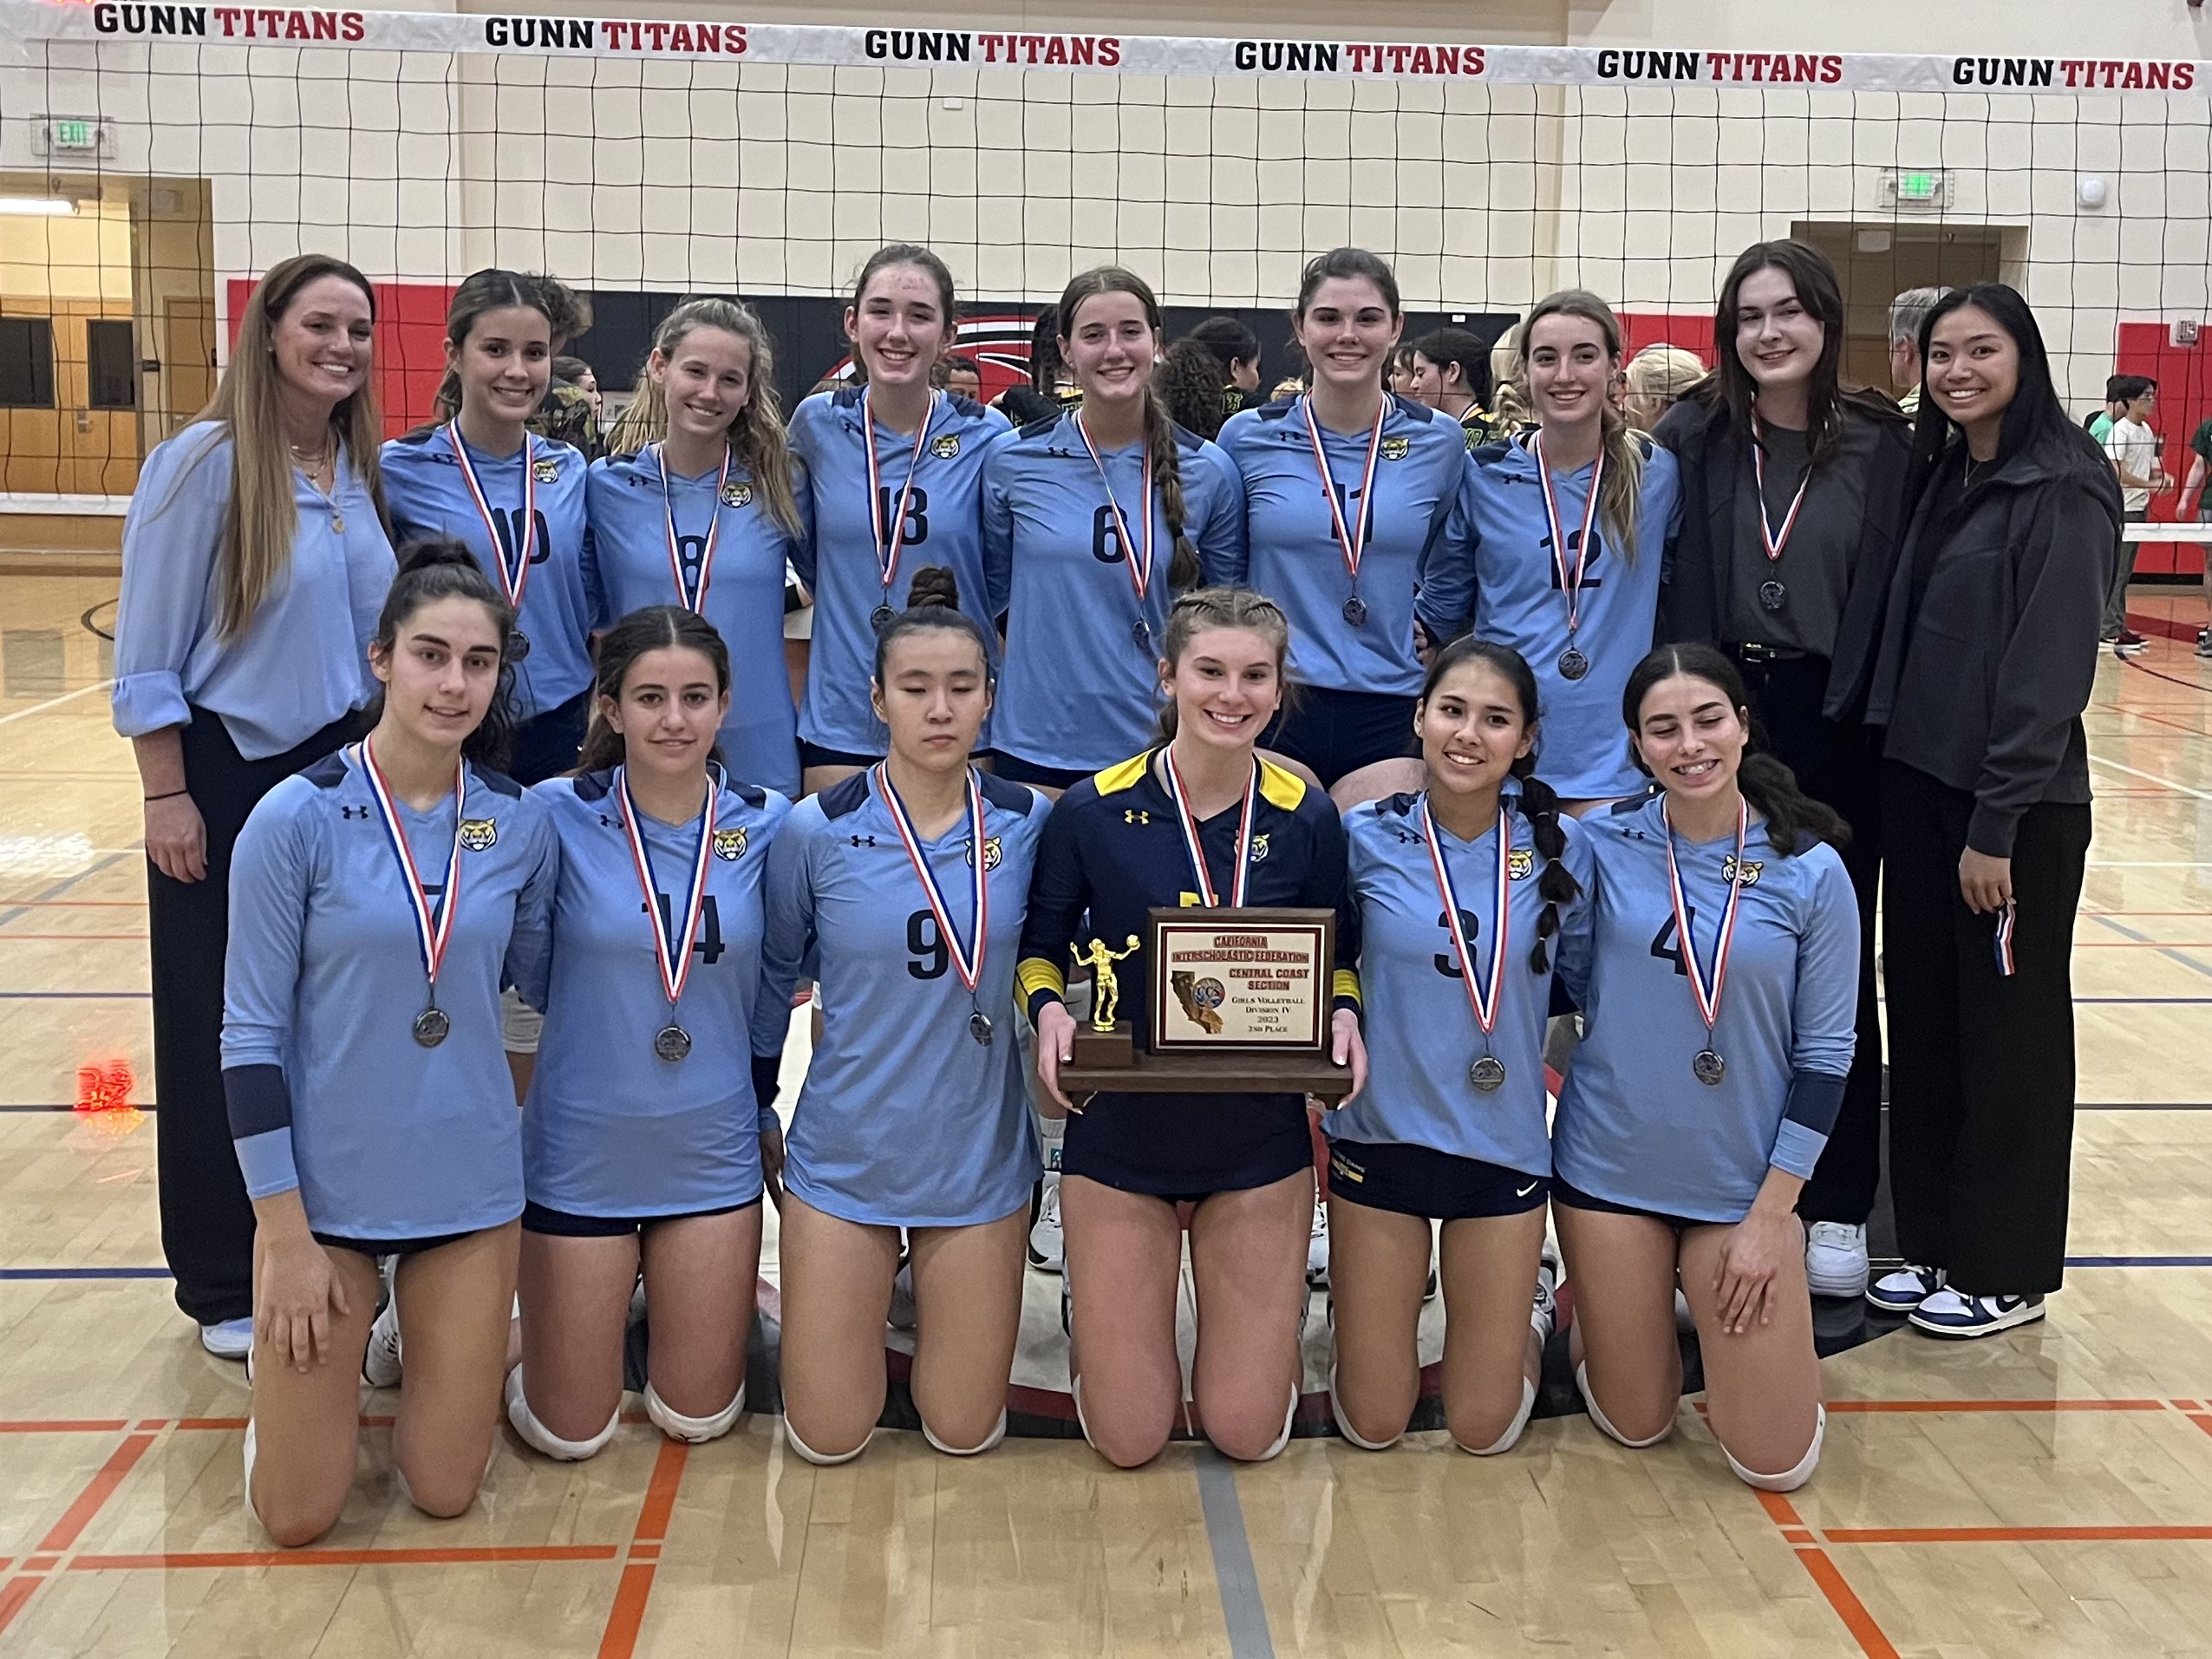 The NDB Varsity Volleyball team poses after winning 2nd place in the CCS Championship.